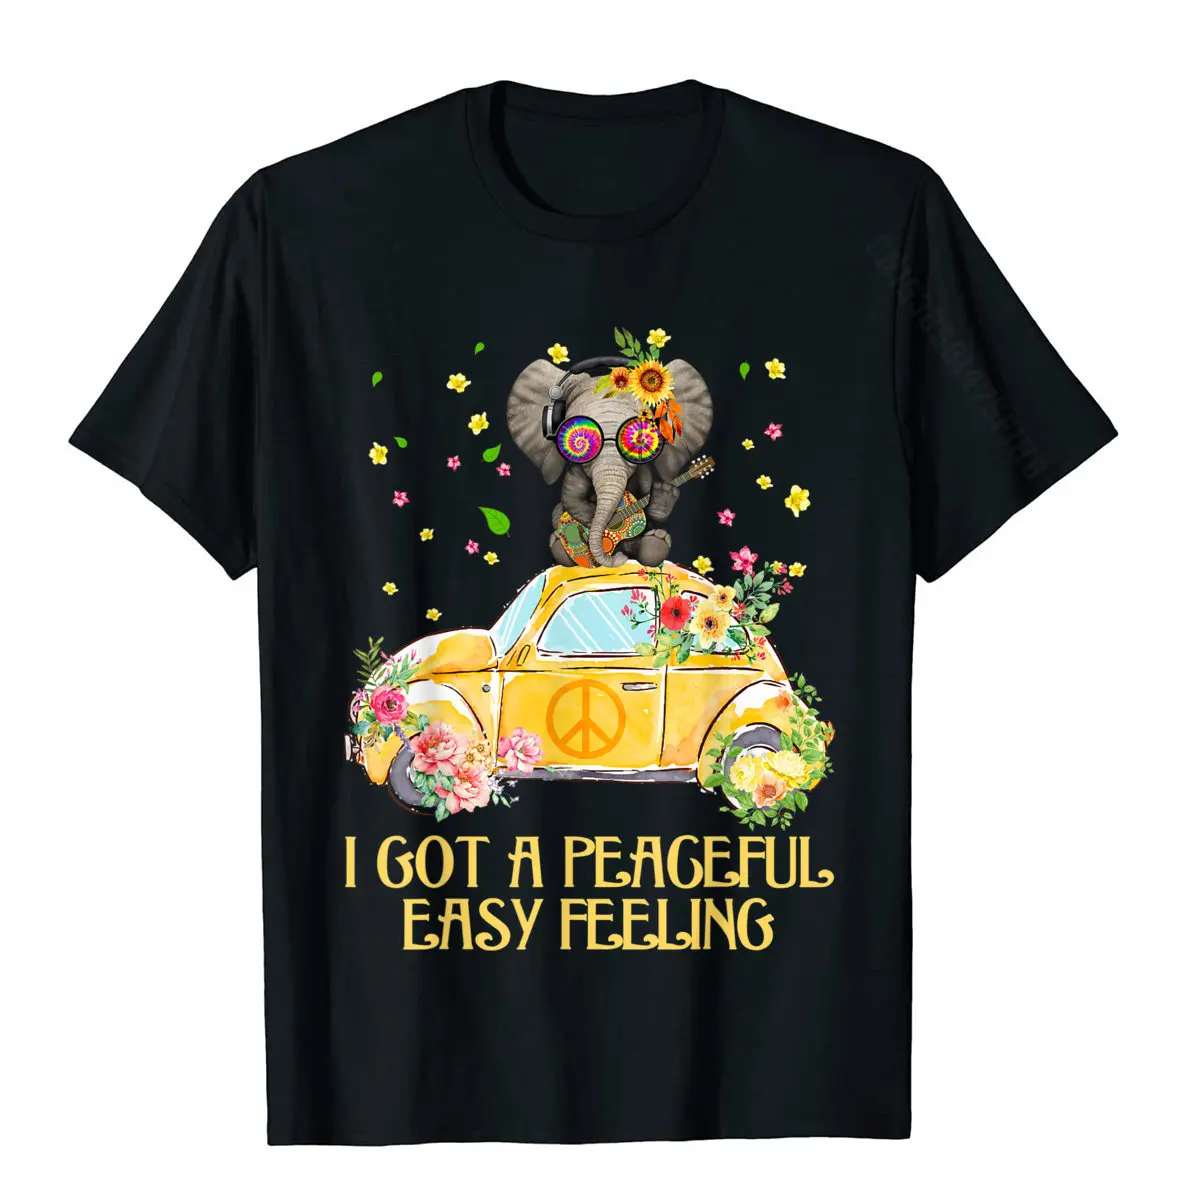 

I Got A Peaceful Easy Feeling Funny Elephant Hippie T-Shirt Leisure Tshirts For Men Cotton Tops Shirt Funny Discount